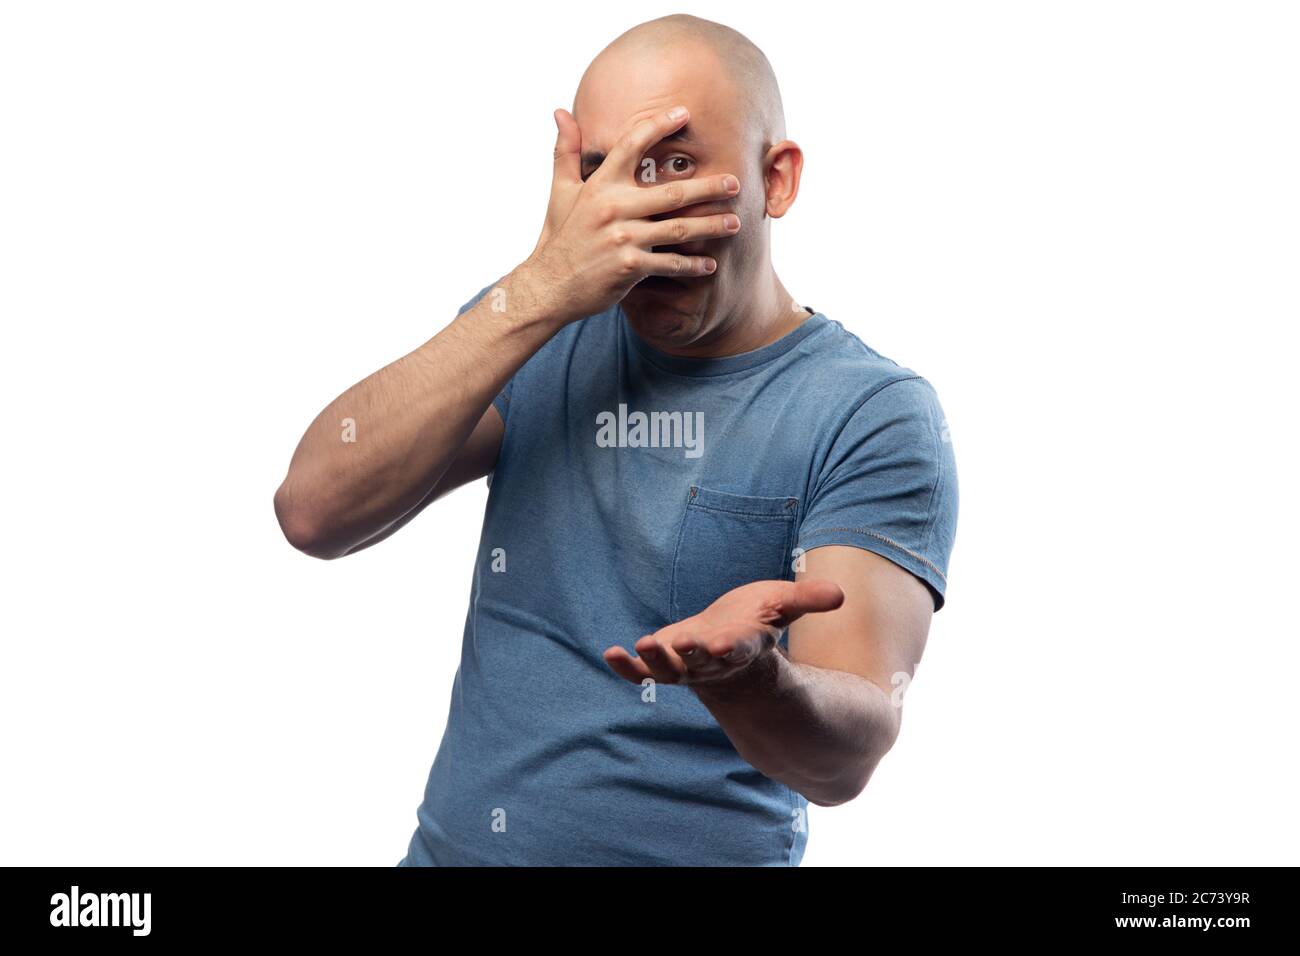 Bald puzzled man in tee shirt showing facepalm gesture Stock Photo